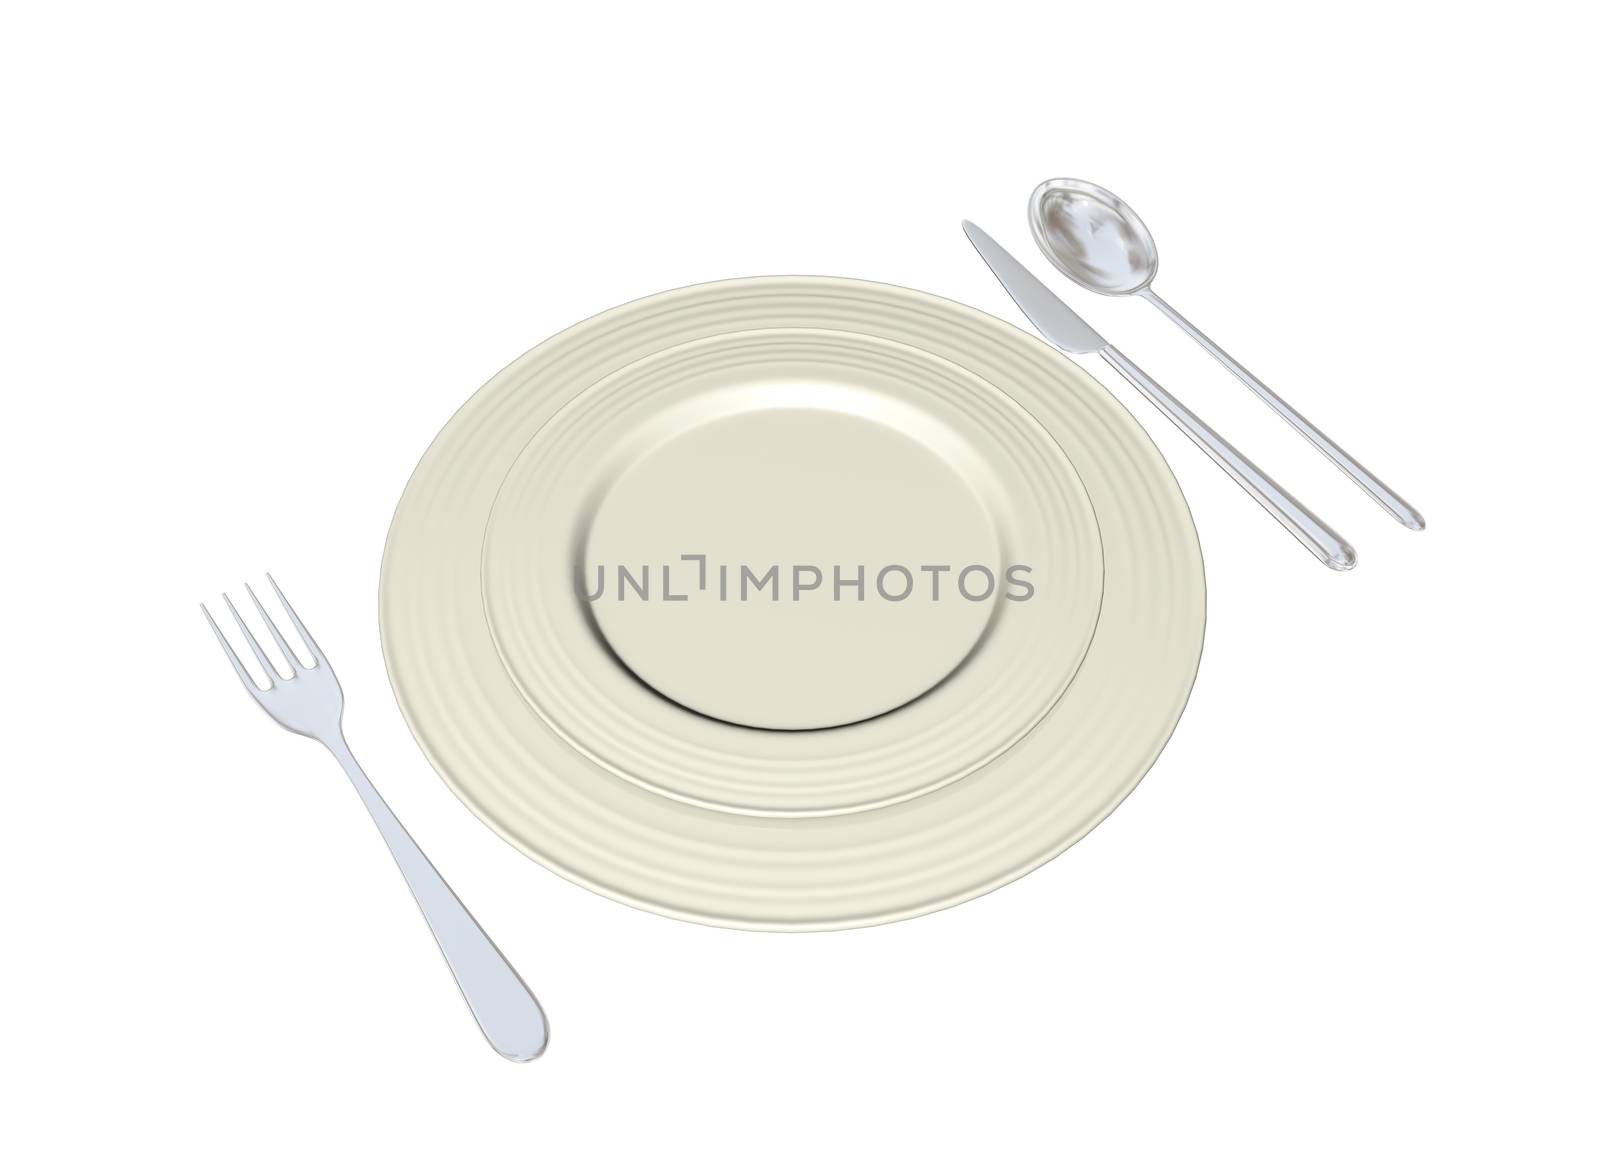 Metal plates with stainless steel spoon fork and knife, 3D illus by Morphart